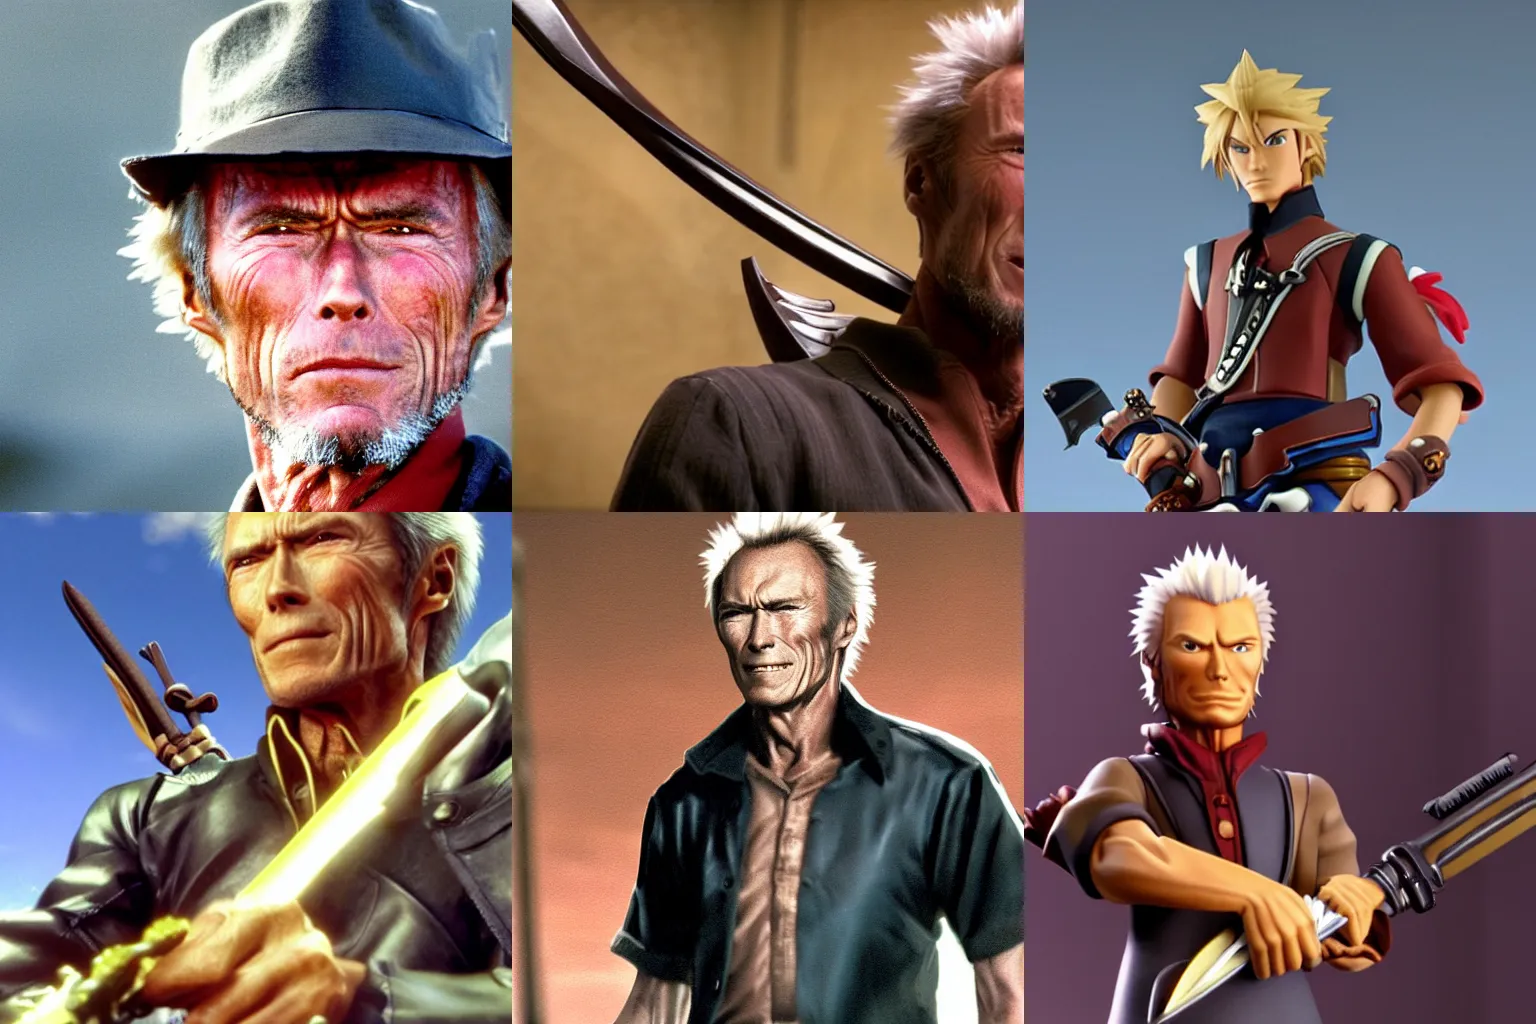 Prompt: A medium shot of Clint Eastwood as a keyblade master, in the style of final fantasy, shallow depth of field